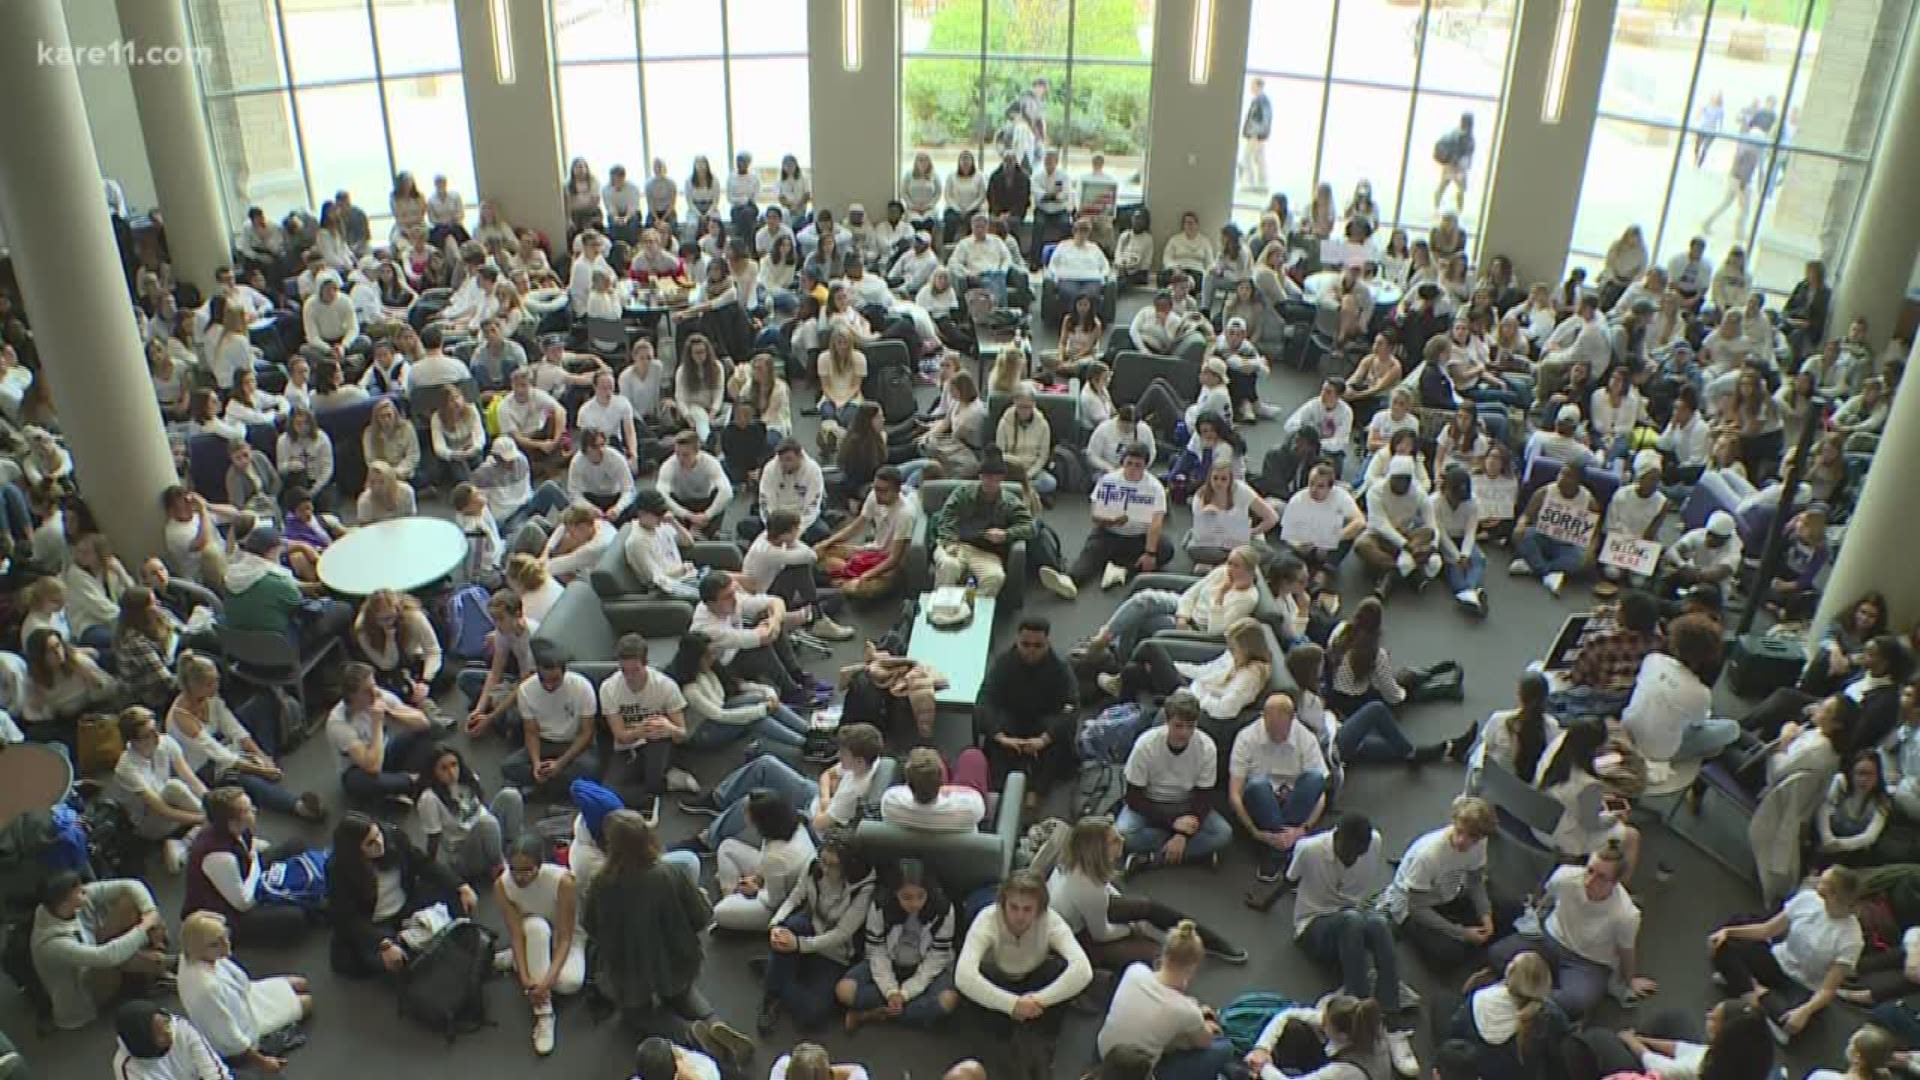 Students, faculty and staff at St. Thomas University held a "white out" sit-in at the Anderson Student Center Thursday to protest a racial incident that happened late last week. https://kare11.tv/2ELT3Ap